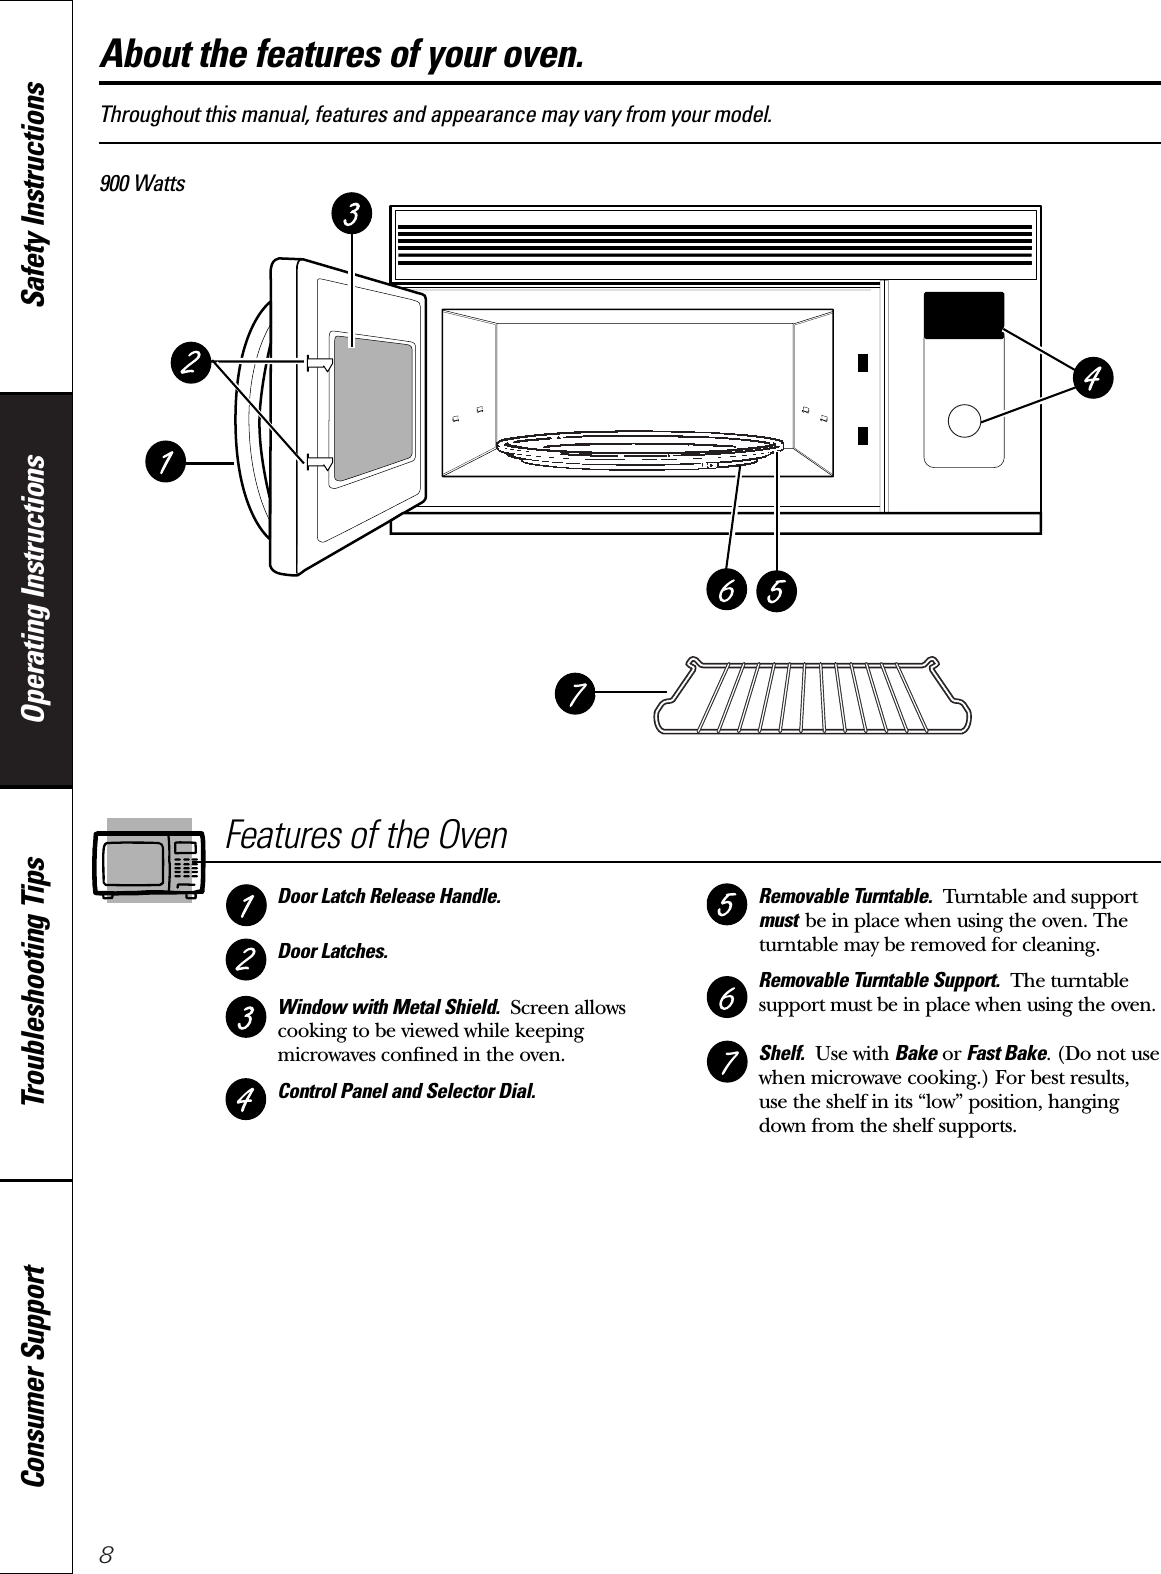 8Operating Instructions Safety InstructionsConsumer Support Troubleshooting TipsAbout the features of your oven.Throughout this manual, features and appearance may vary from your model.900 WattsFeatures of the OvenDoor Latch Release Handle.Door Latches.Window with Metal Shield. Screen allowscooking to be viewed while keepingmicrowaves confined in the oven.Control Panel and Selector Dial.Removable Turntable. Turntable and supportmust be in place when using the oven. Theturntable may be removed for cleaning.Removable Turntable Support. The turntablesupport must be in place when using the oven.Shelf. Use with Bake or Fast Bake. (Do not usewhen microwave cooking.) For best results,use the shelf in its “low” position, hangingdown from the shelf supports.